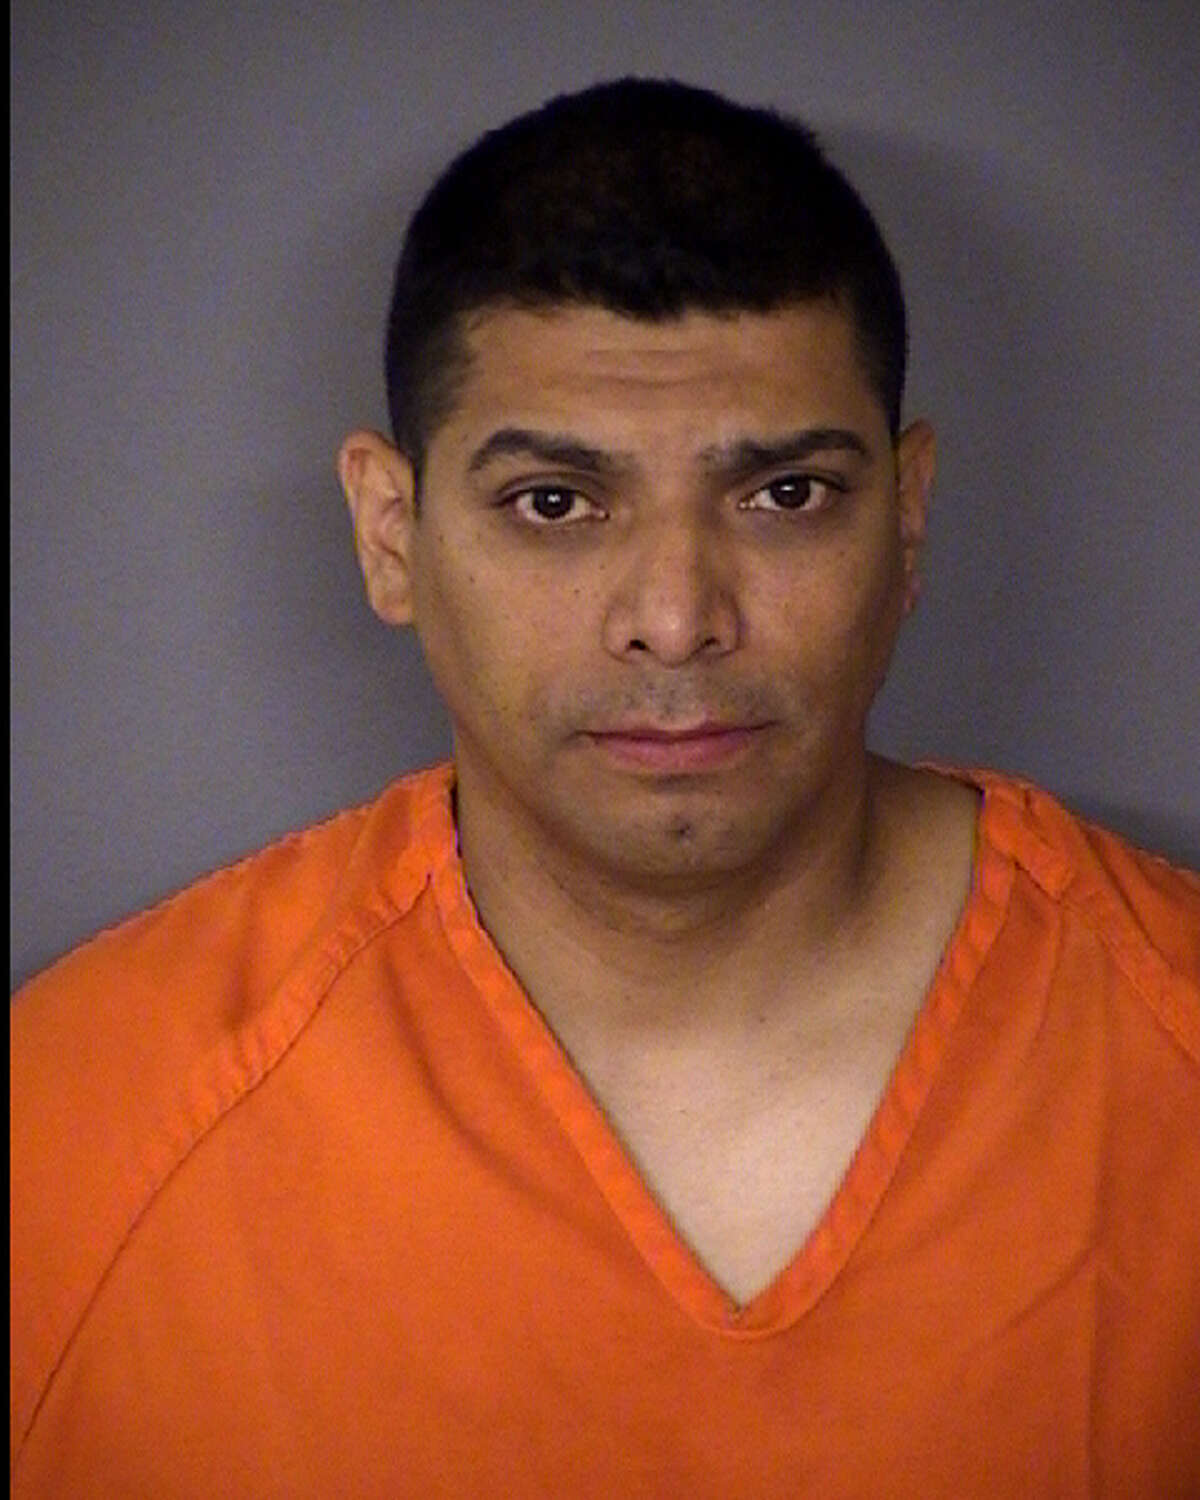 SAPD Officer Daniel Lopez, 42, seen in a July 5, 2013 booking photo provided by the Bexar County Sheriff's Department was arrested at 11:54 p.m. on July 4, 2013 and charged with aggravated assault with a deadly weapon and two counts of deadly conduct following a short standoff at his house in the 100 block of Whitecliff. Lopez allegedly pointed a gun at his wife.